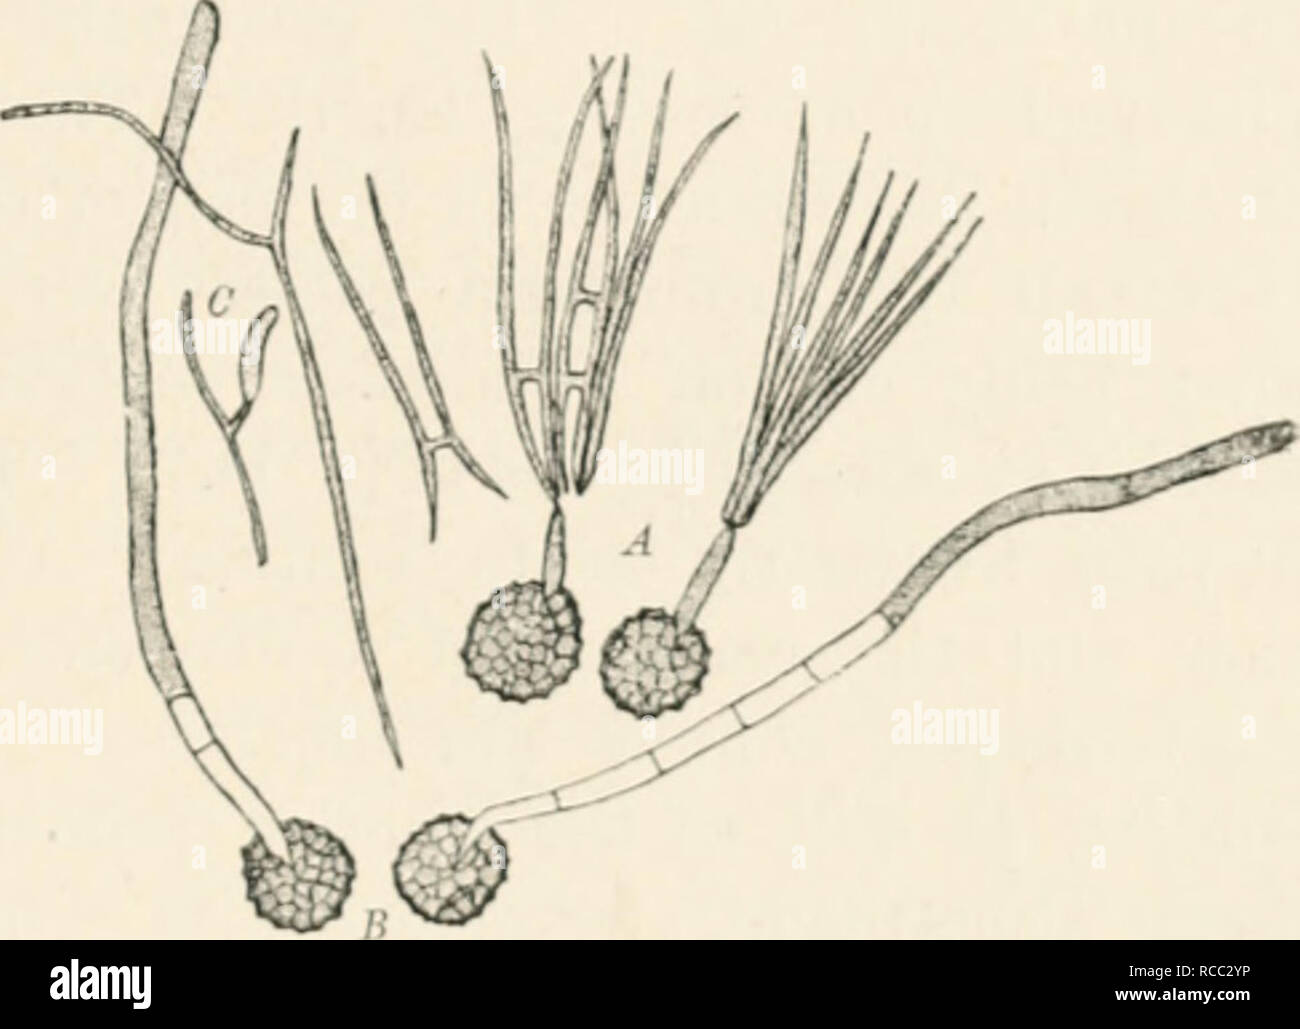 . Diseases of plants induced by cryptogamuc parasites; introduction to the study of pathogenic fungi, slime-fungi, bacteria, and algae. English ed. by William G. Smith. Plant diseases; Parasitic plants. Fio. 167.—TilUlUi liitici. A, Twu spores genninatcd in moist air; a short promycclimn is dcvcloiicJ, nuil Ix-'ars a crown of conidia (sporidia), sevcnil of wliich have fused in pairs. Fushion of conidi.i, gcrniination, and development of a secondary conidiiini, C, are also shown. S, Two spores gei-miuated in water with proniyeelia which elonjf-.ite till the water surface is re;iehed, where they Stock Photo